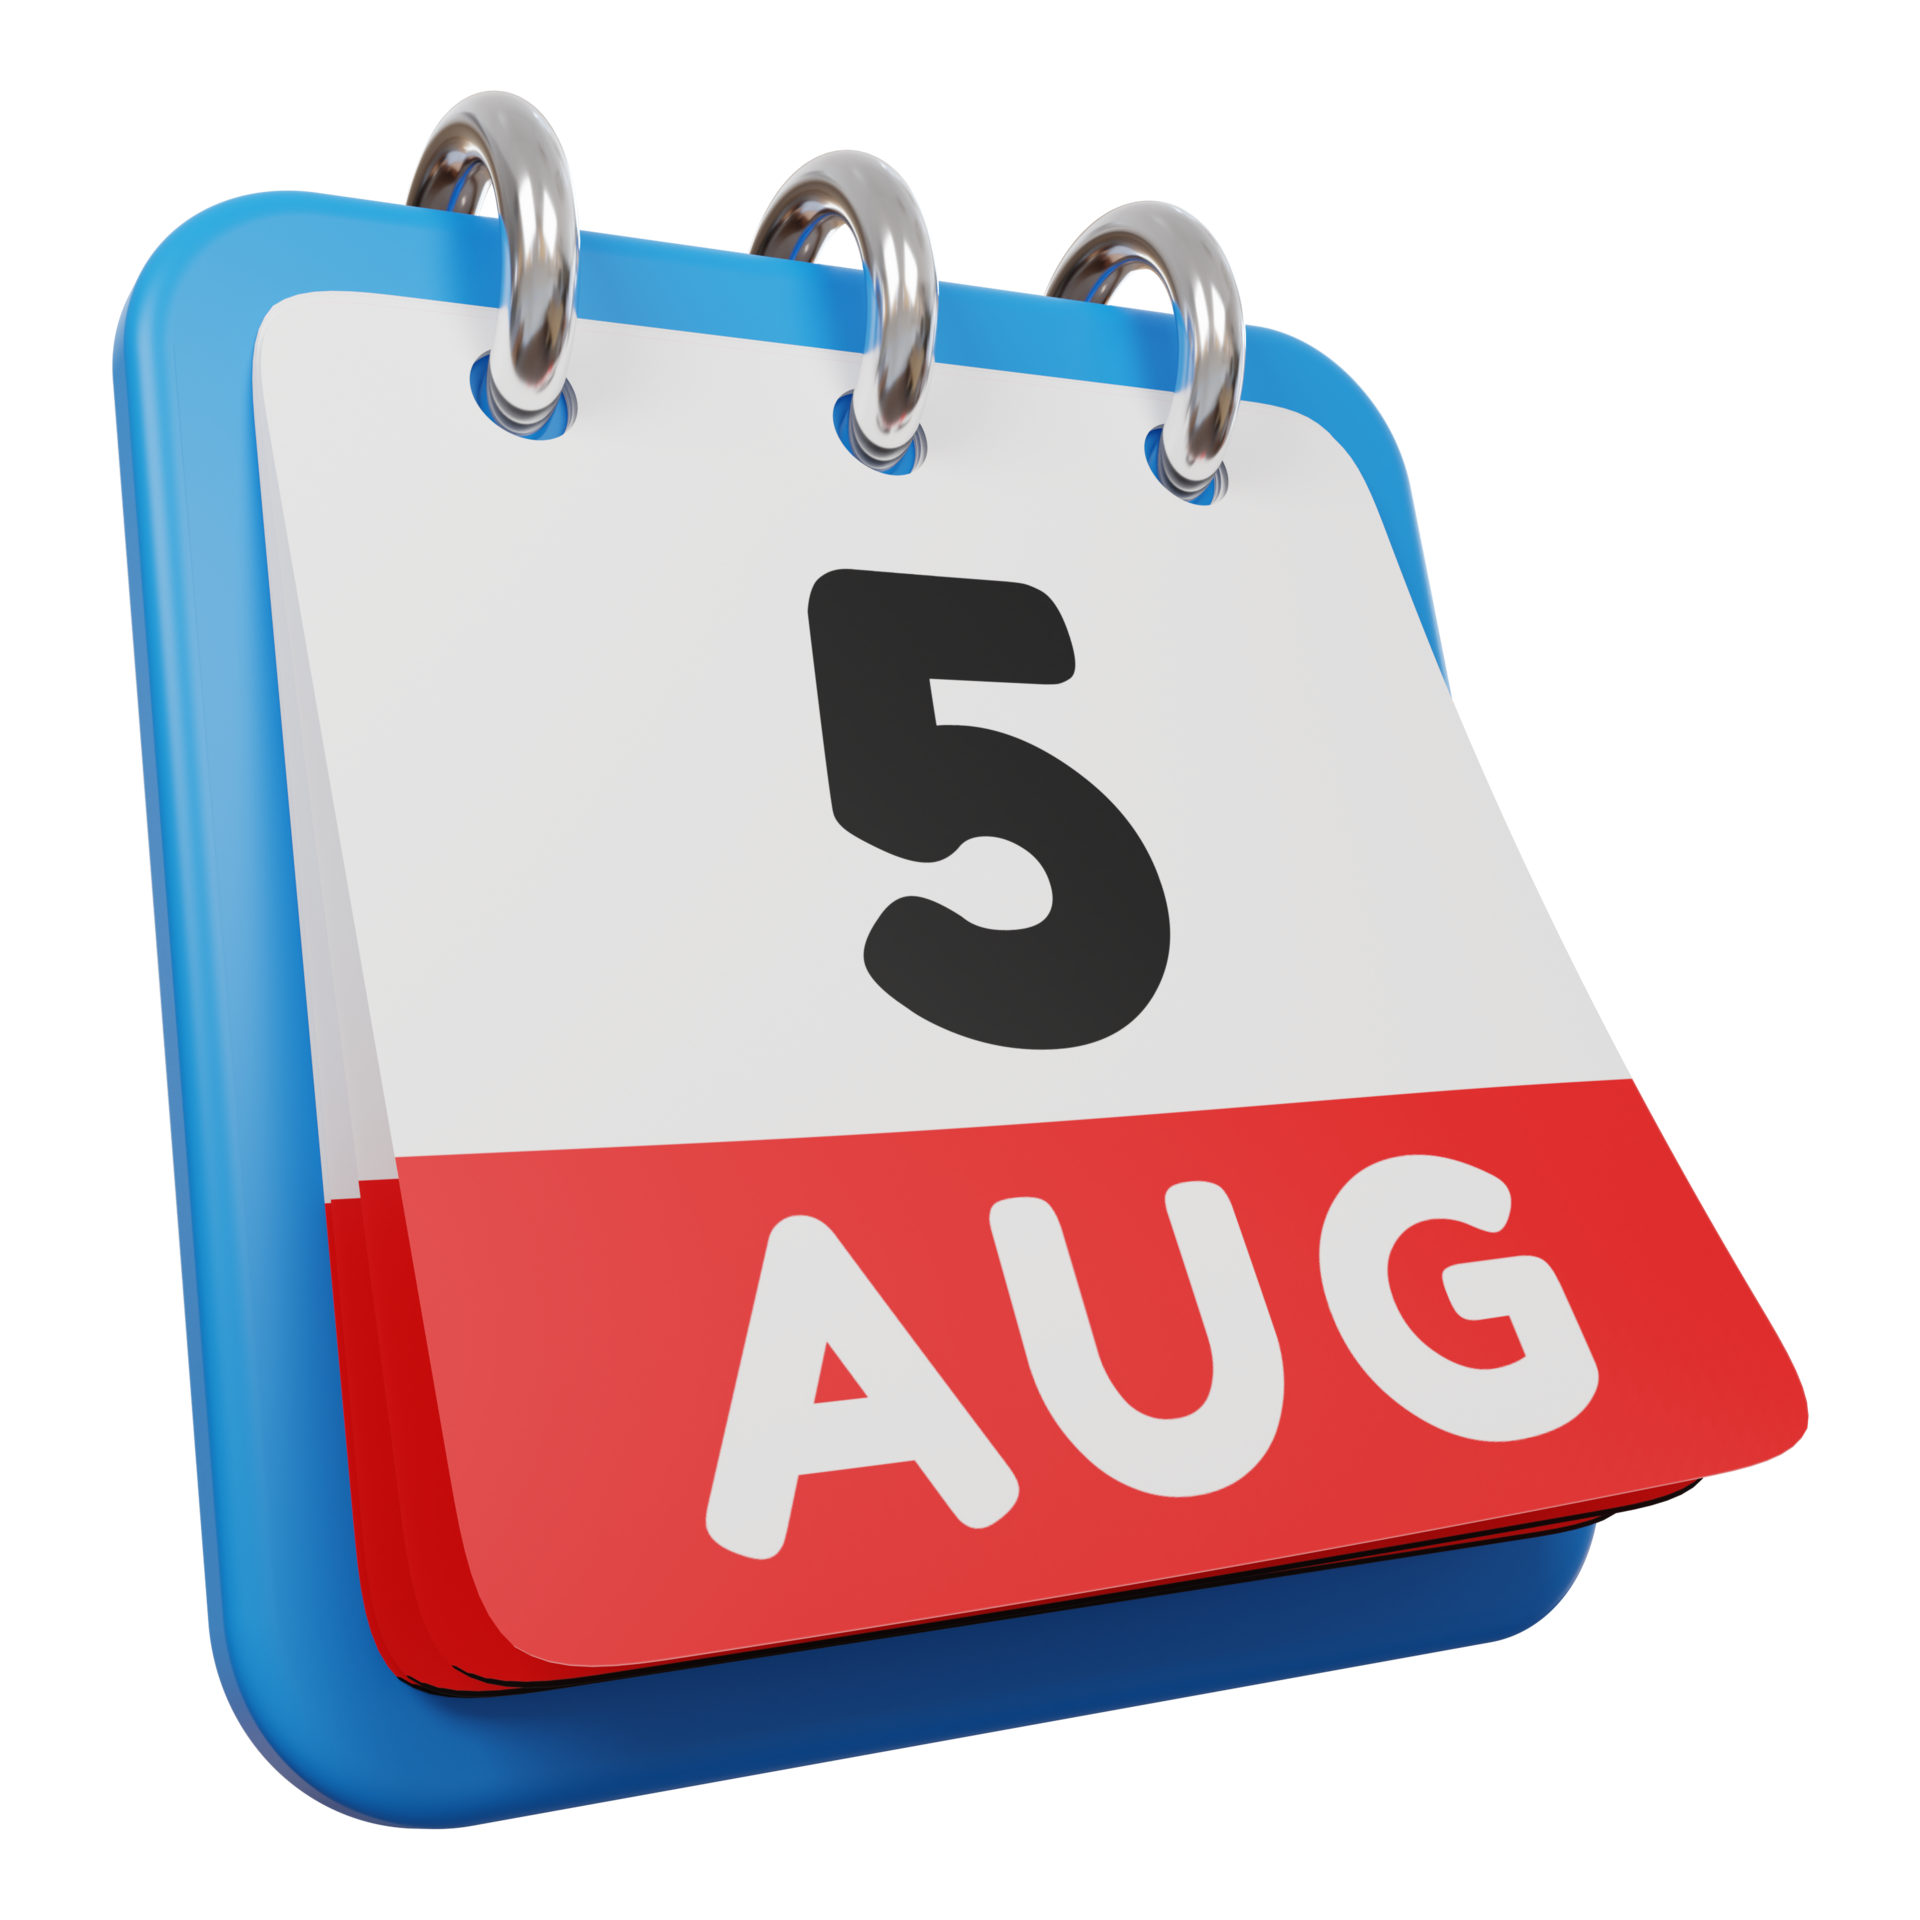 https://static.vecteezy.com/system/resources/previews/009/638/315/original/5-august-day-calendar-3d-render-right-view-png.png